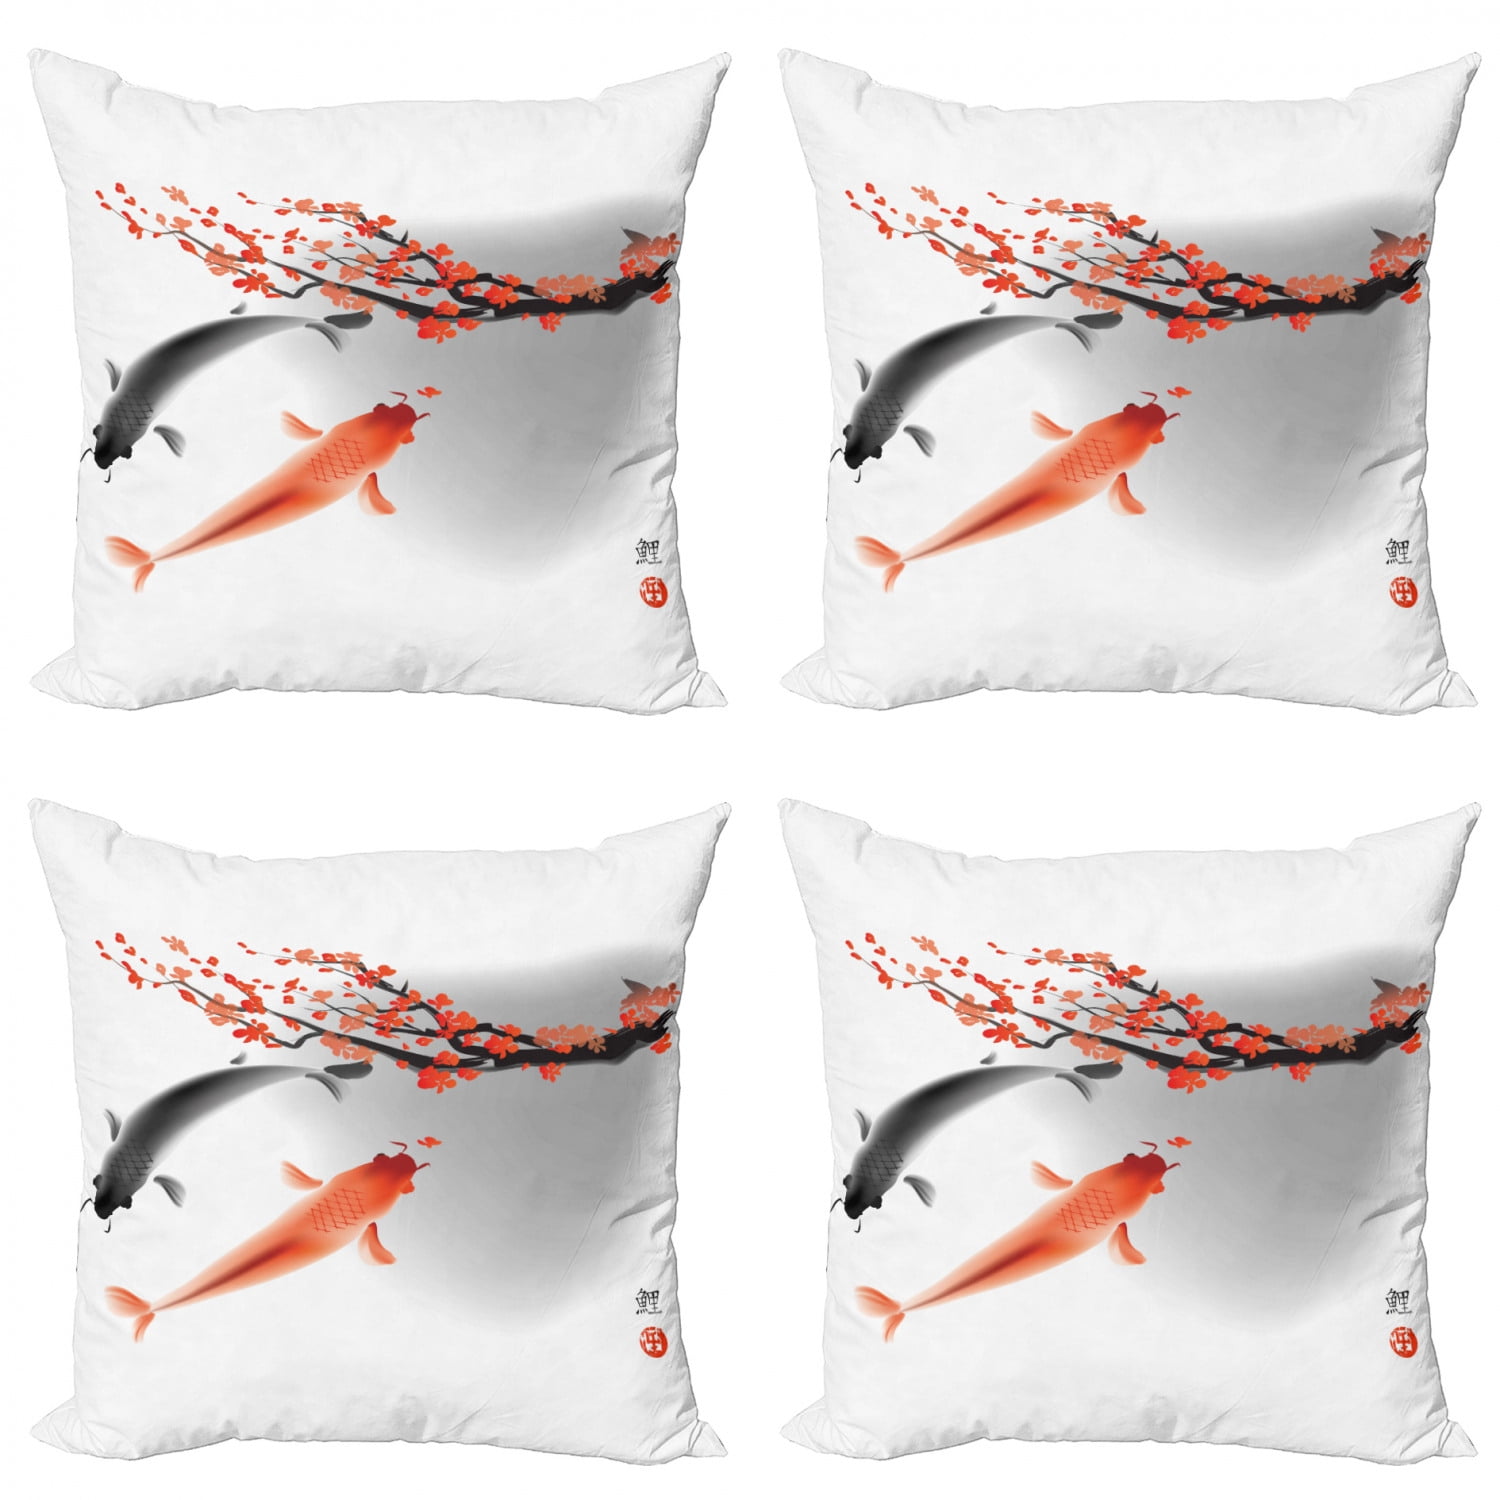 4pcs cushion covers koi carp fish pillows for the couch 